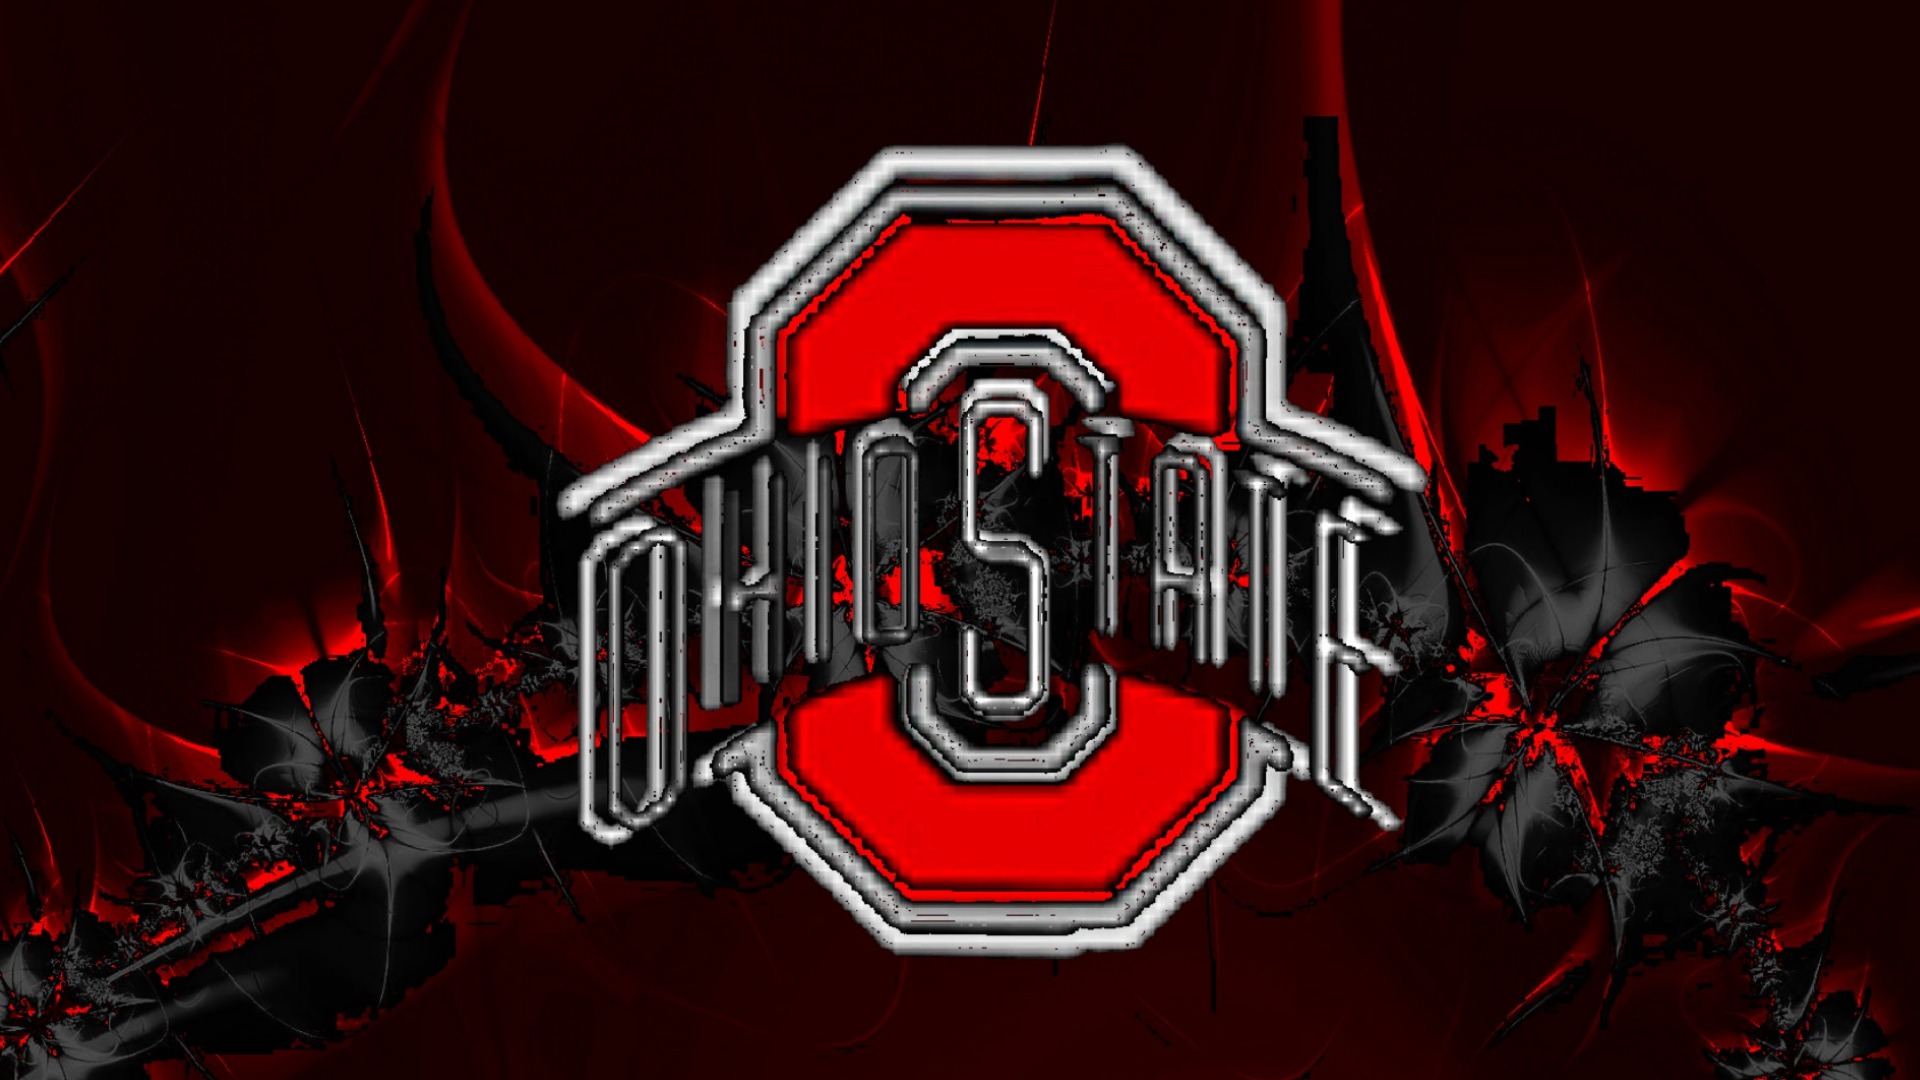 Ohio State Wallpaper 19201080 22198 Hd Wallpaper Res , HD Wallpaper & Backgrounds